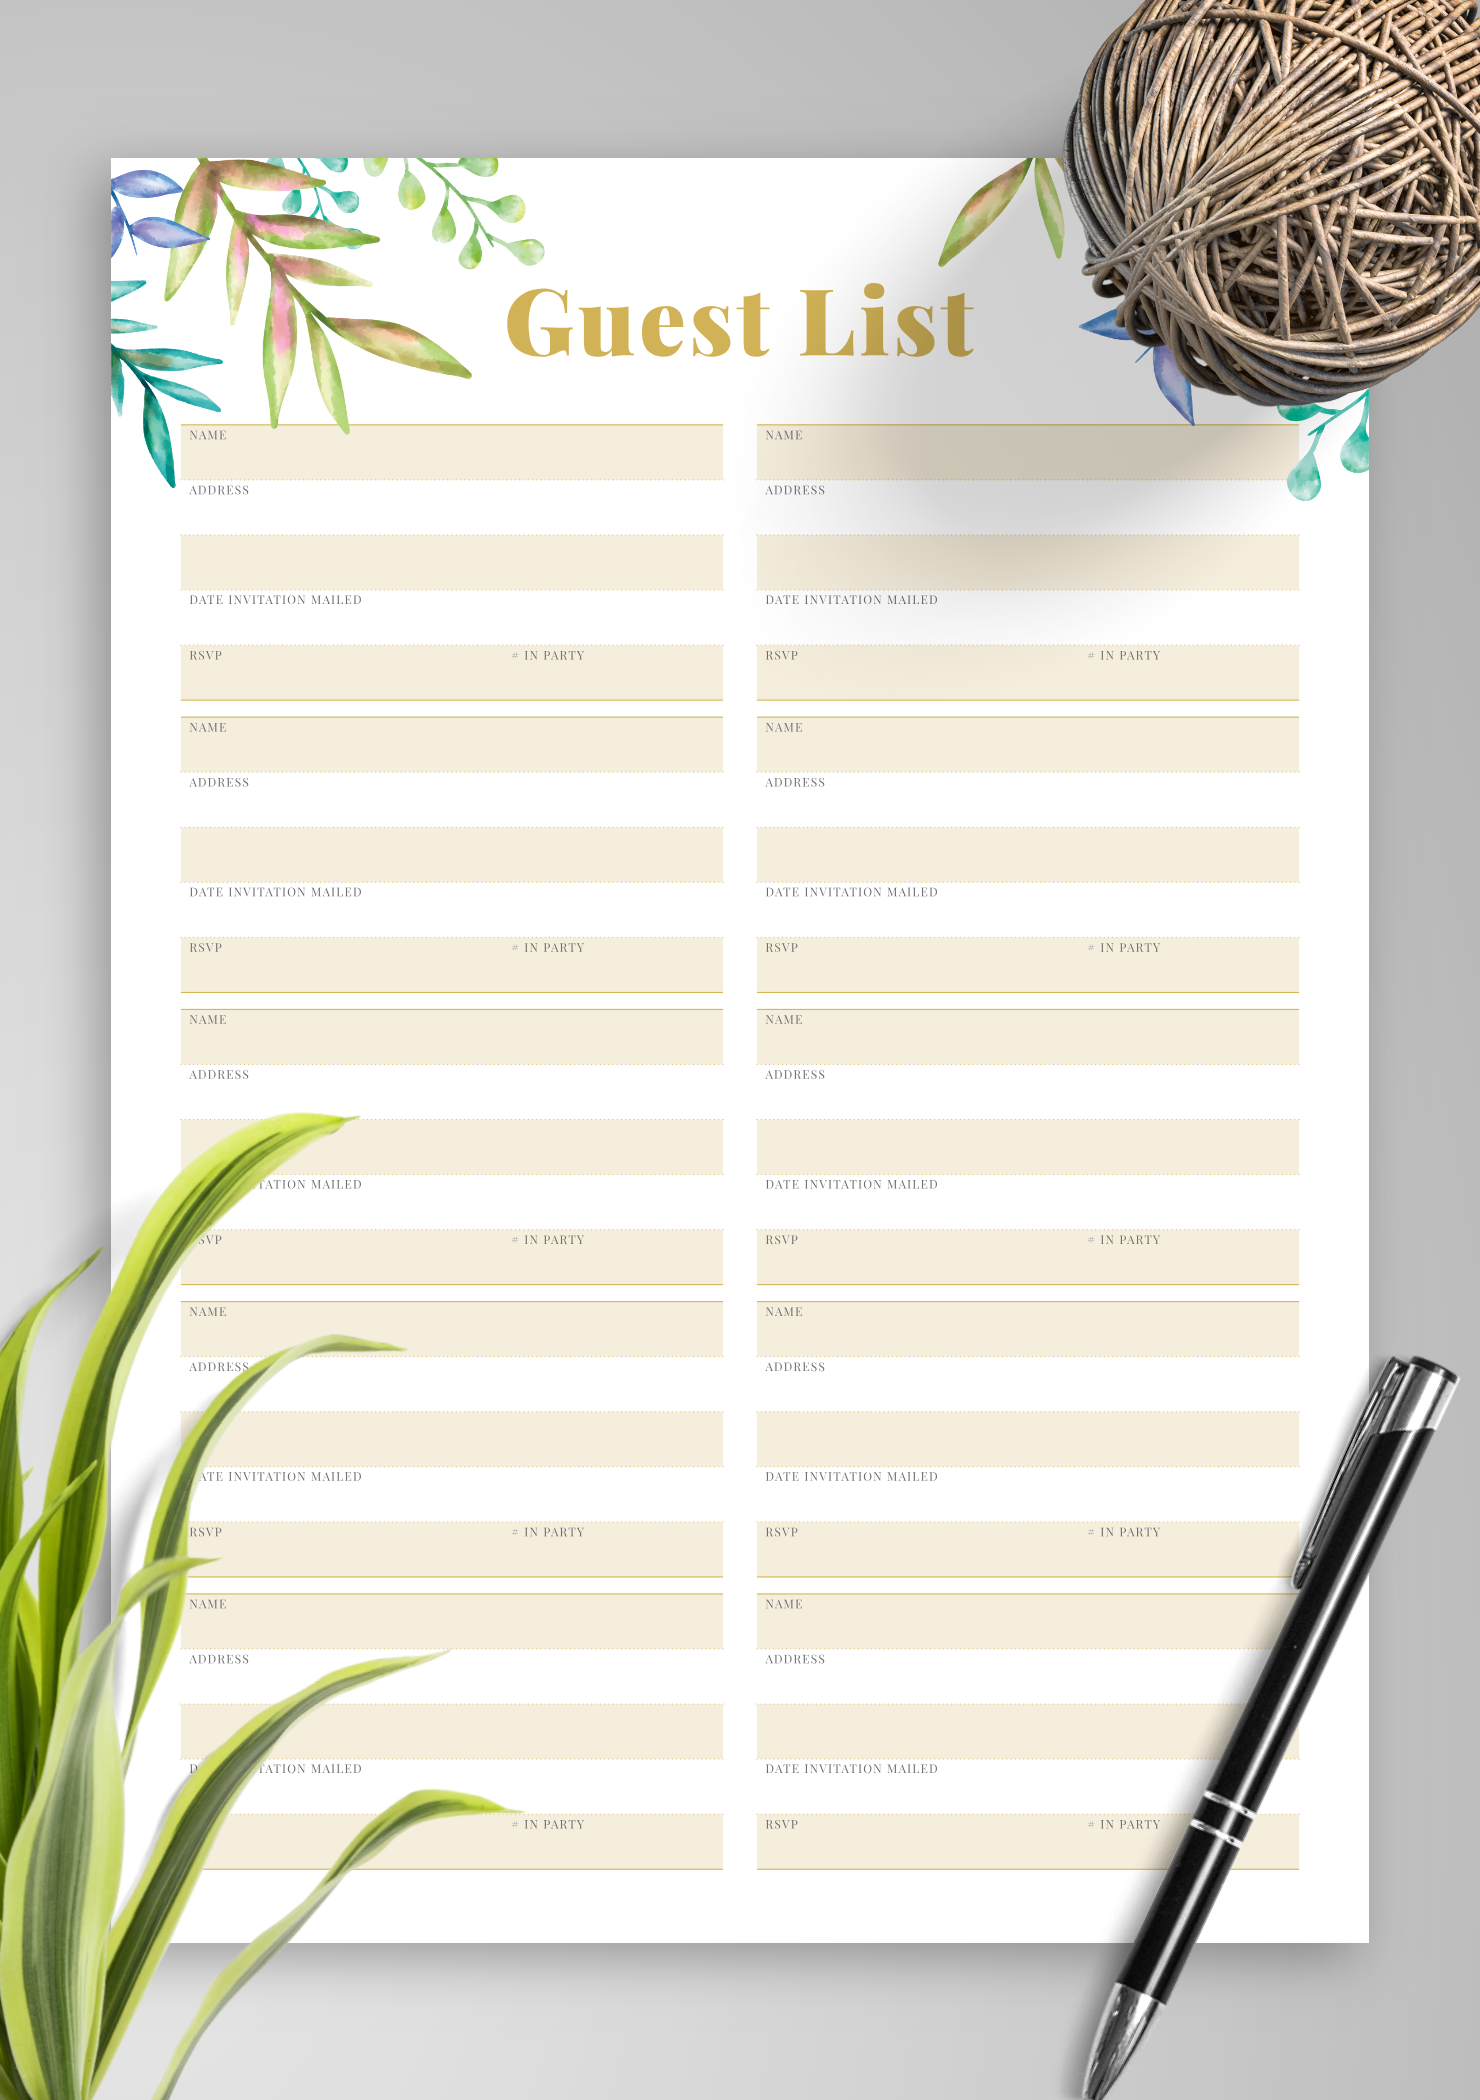 Download Printable Wedding Guest List with Botanical Pattern PDF Throughout Wedding Guest Checklist Template Pertaining To Wedding Guest Checklist Template